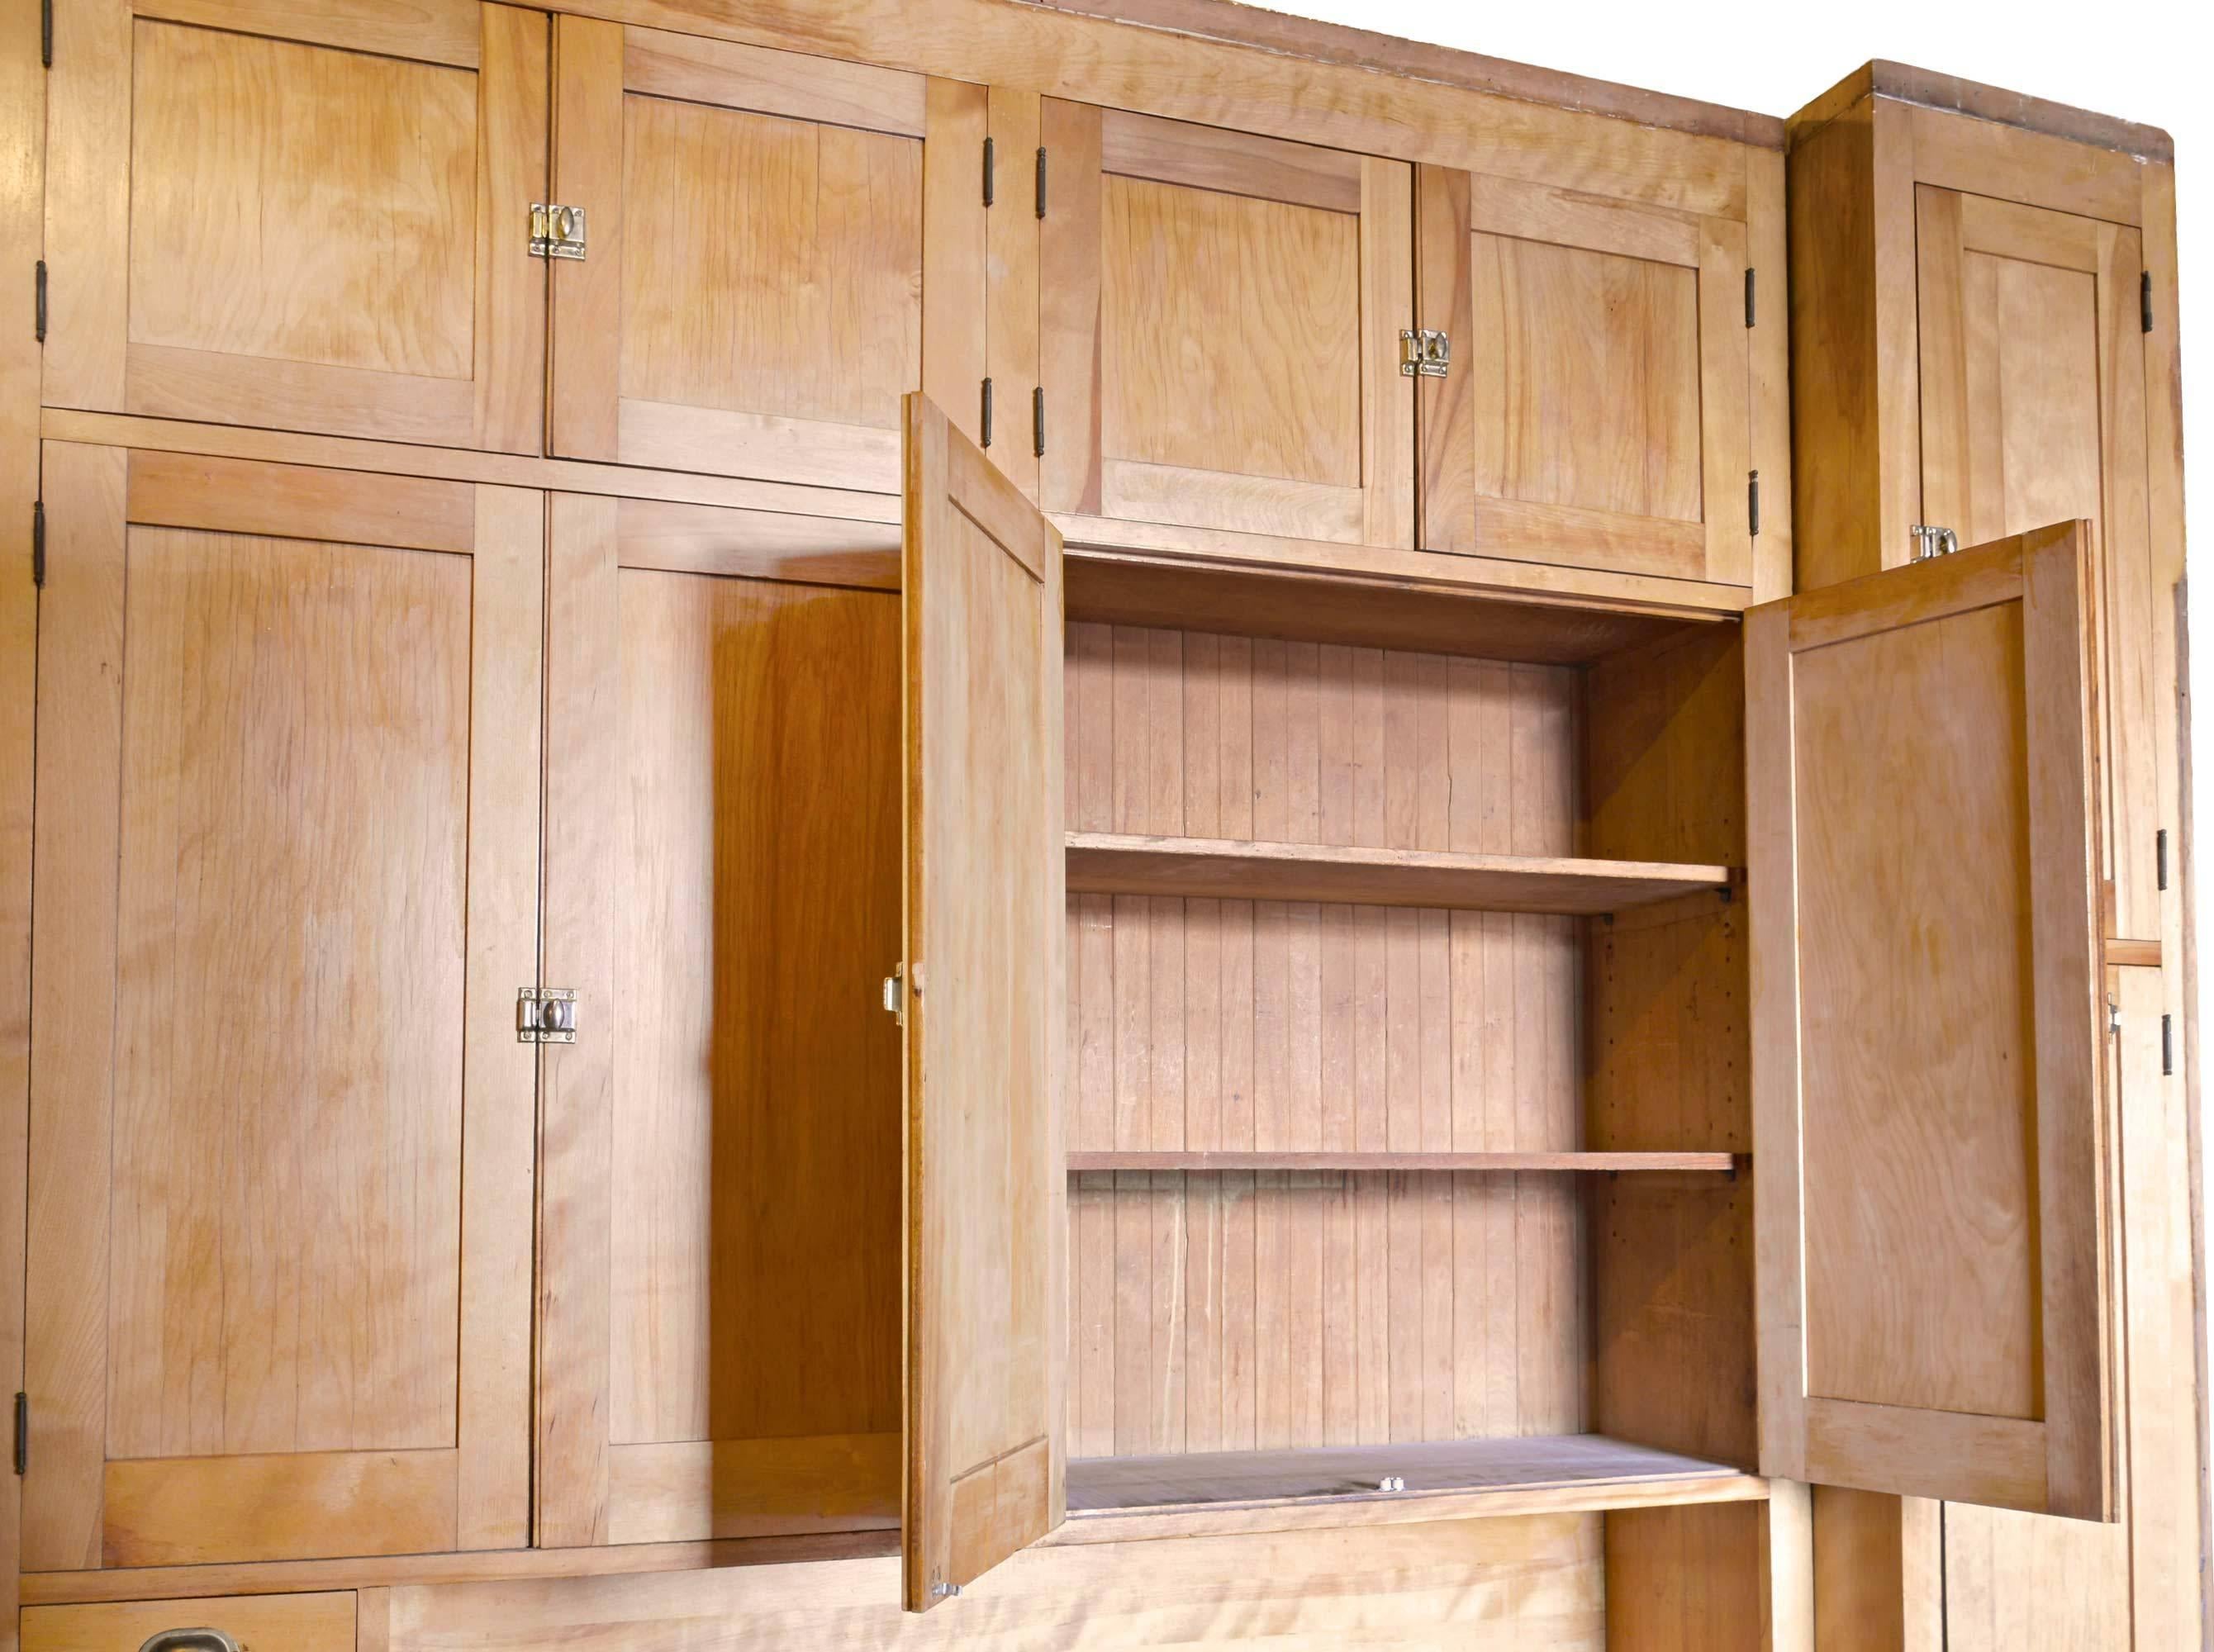 1920s cabinets